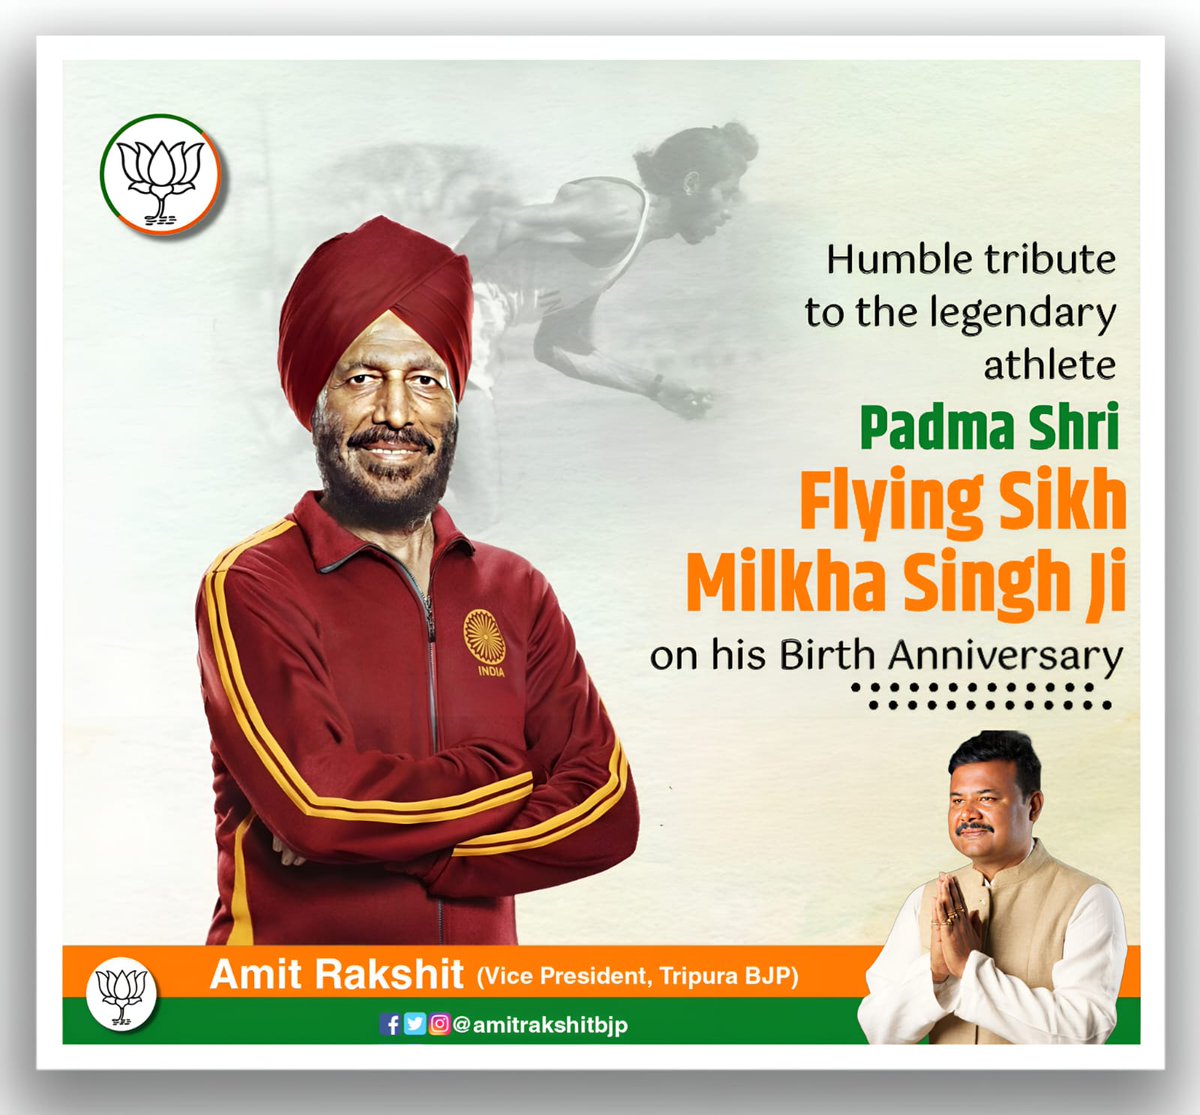 My humble tributes to the great athlete Milkha Singh on his birth anniversary, who made India proud by winning gold medals in four Asian Games and 1958 Commonwealth Games and is popularly known as 'Flying Sikh'.

#MilkhaSingh